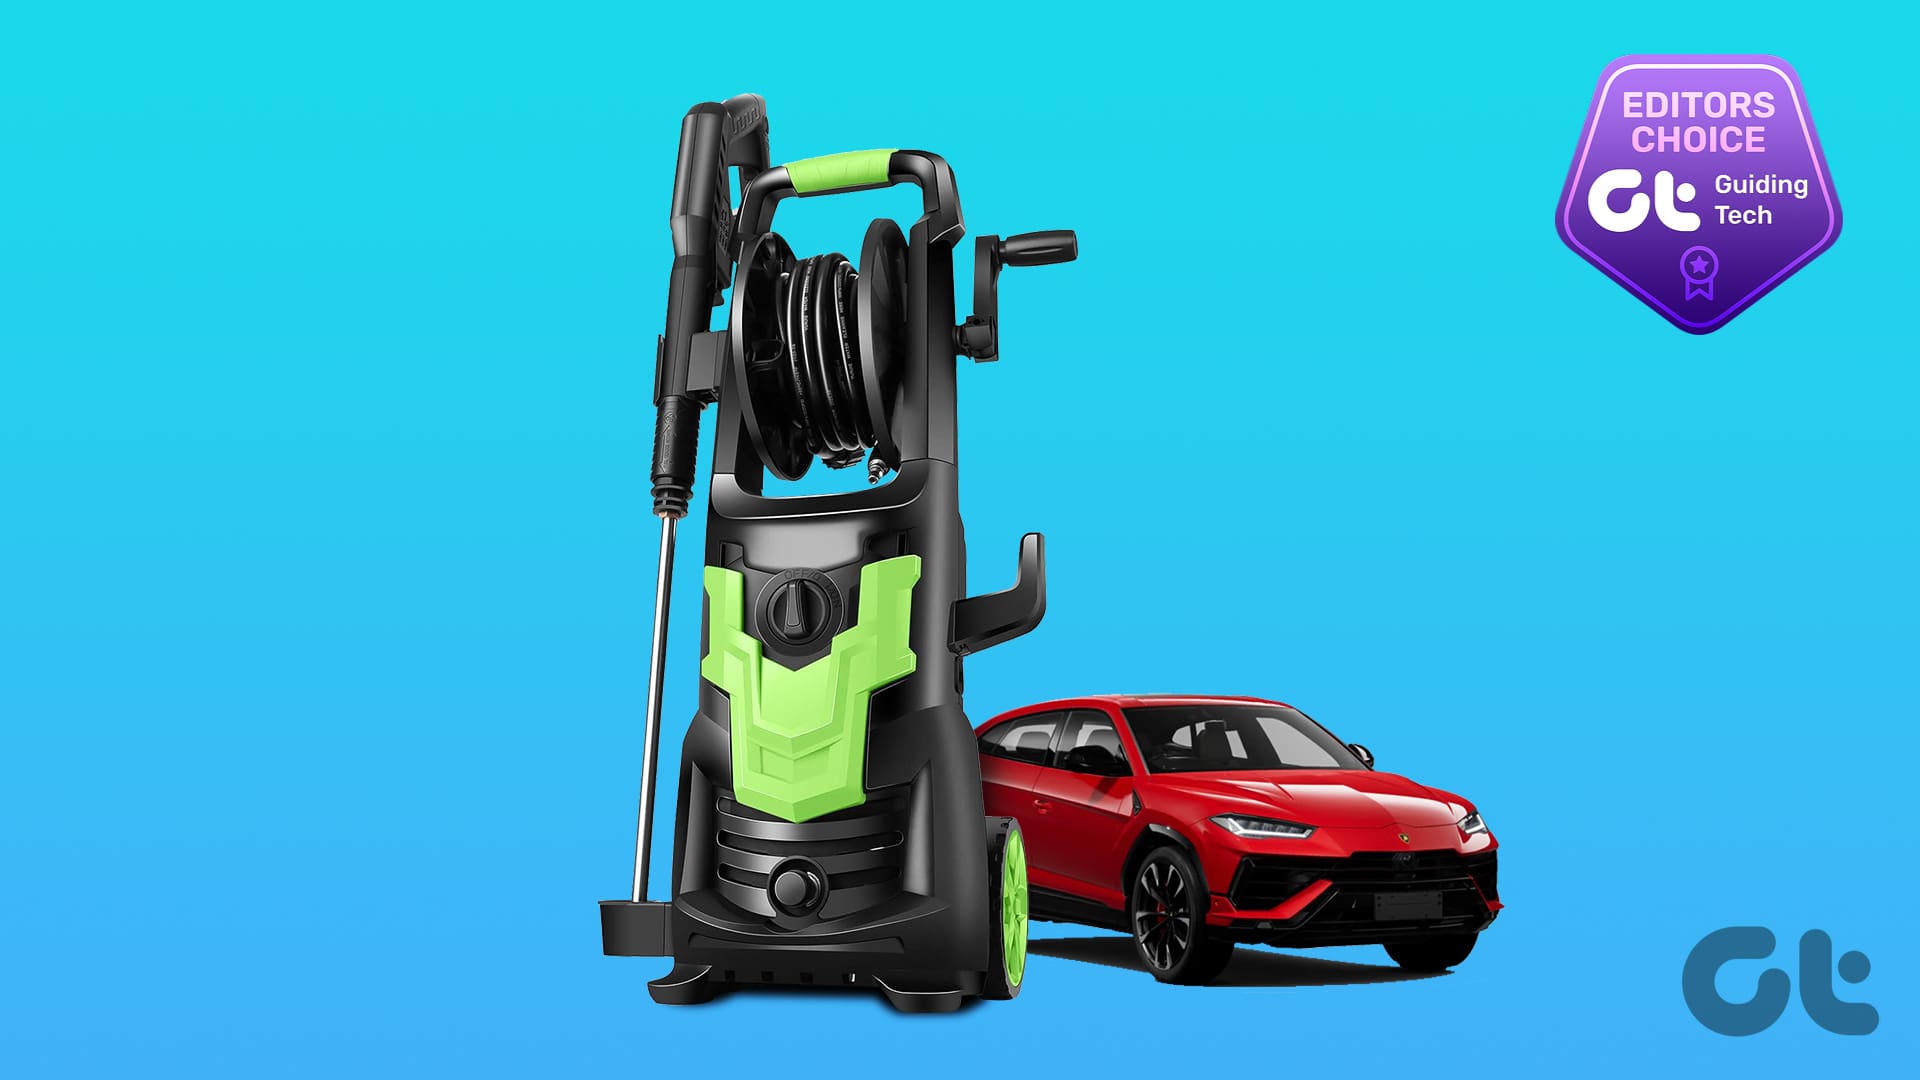 Best Electric Pressure Washer for Cars